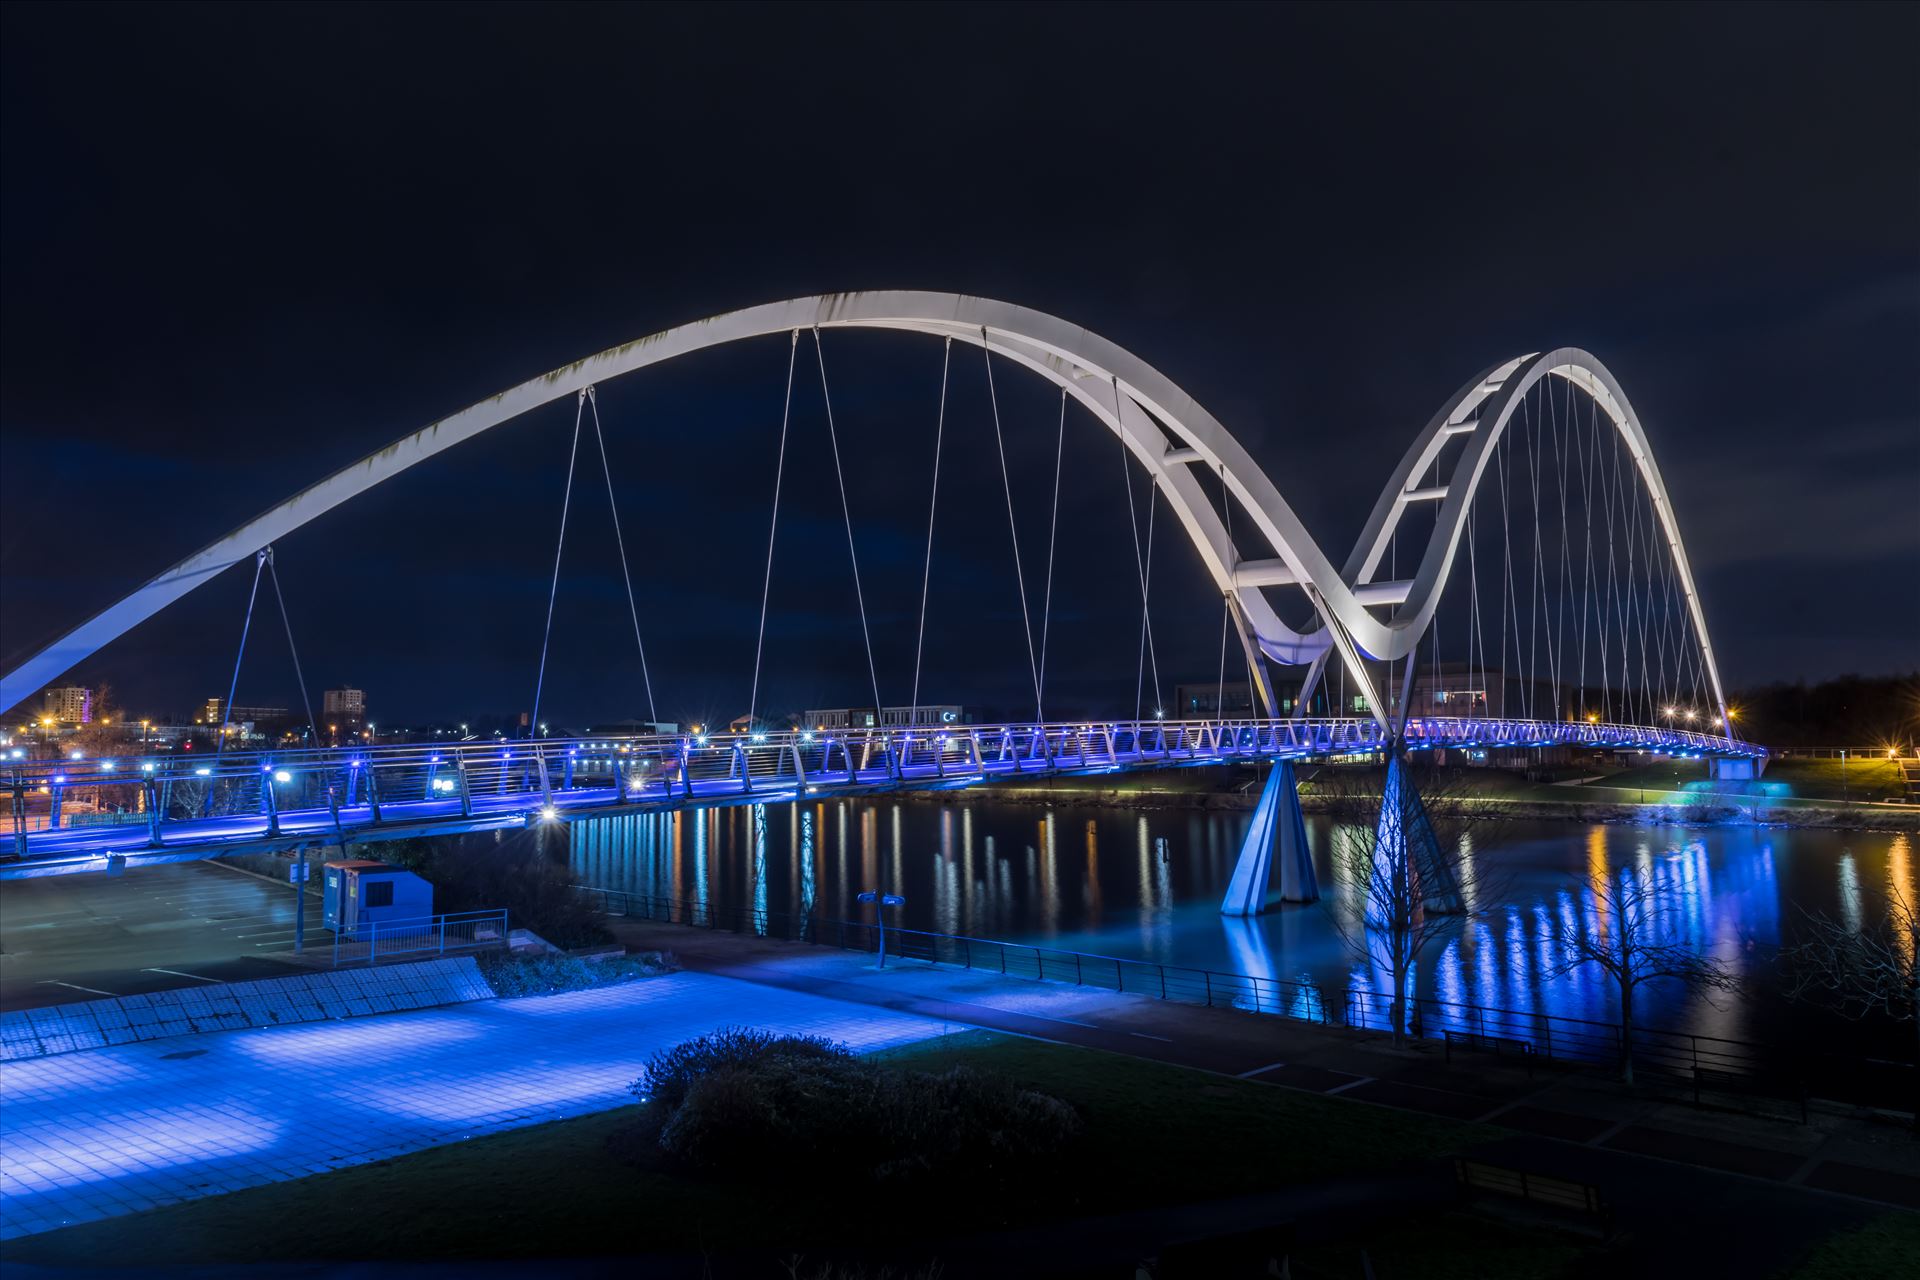 The Infinity Bridge 10 - The Infinity Bridge is a public pedestrian and cycle footbridge across the River Tees that was officially opened on 14 May 2009 at a cost of £15 million. by philreay